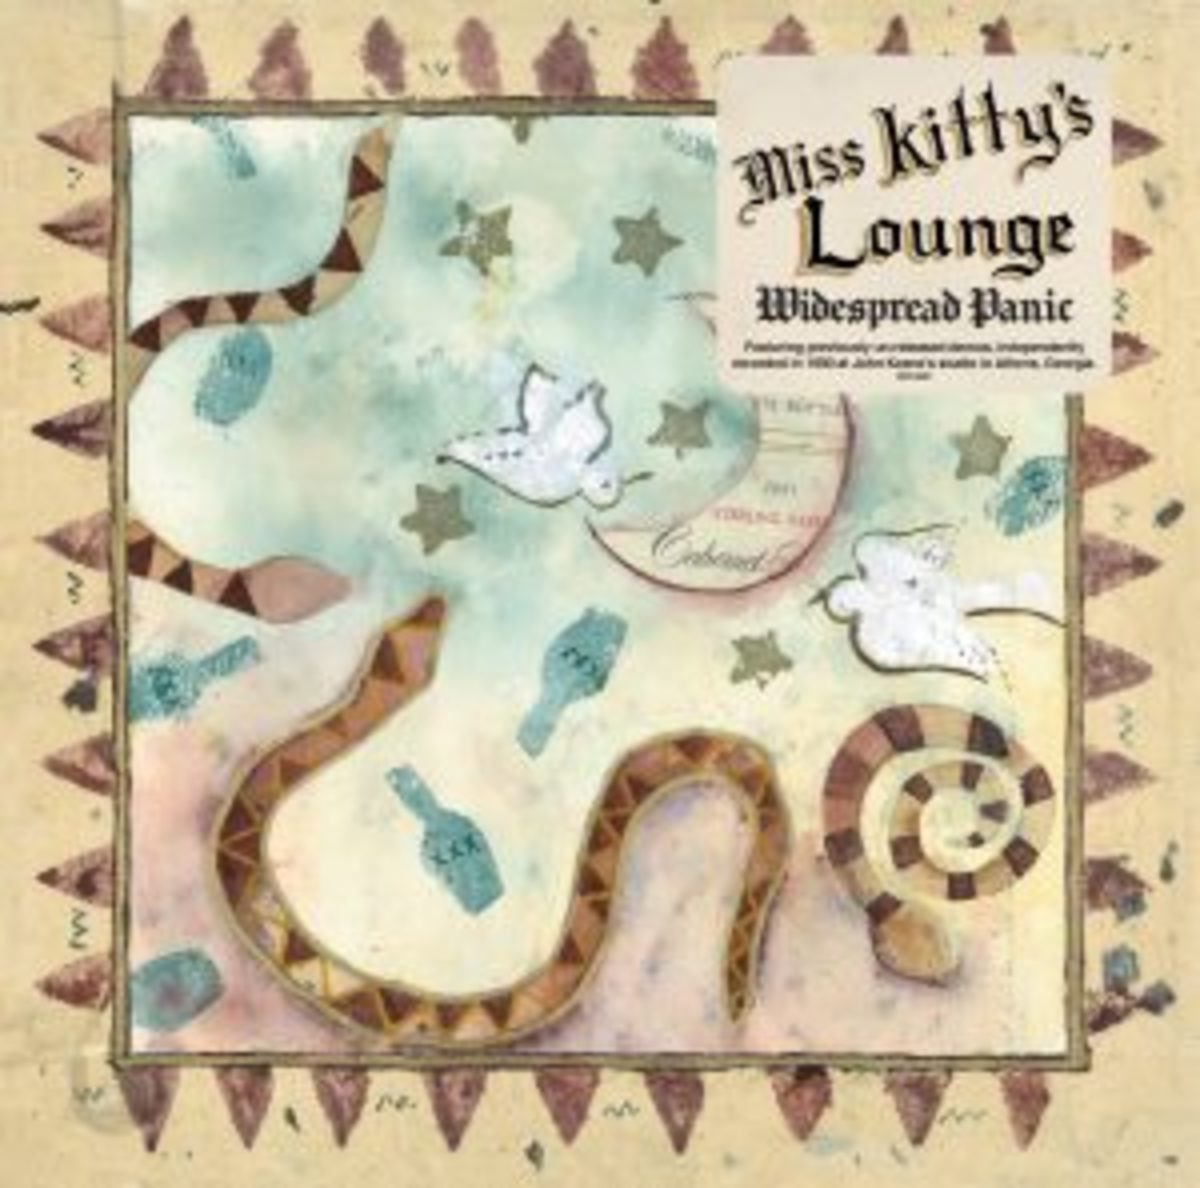 Widespread-Panic-Miss-Kittys-Lounge-Album-Cover-300x297